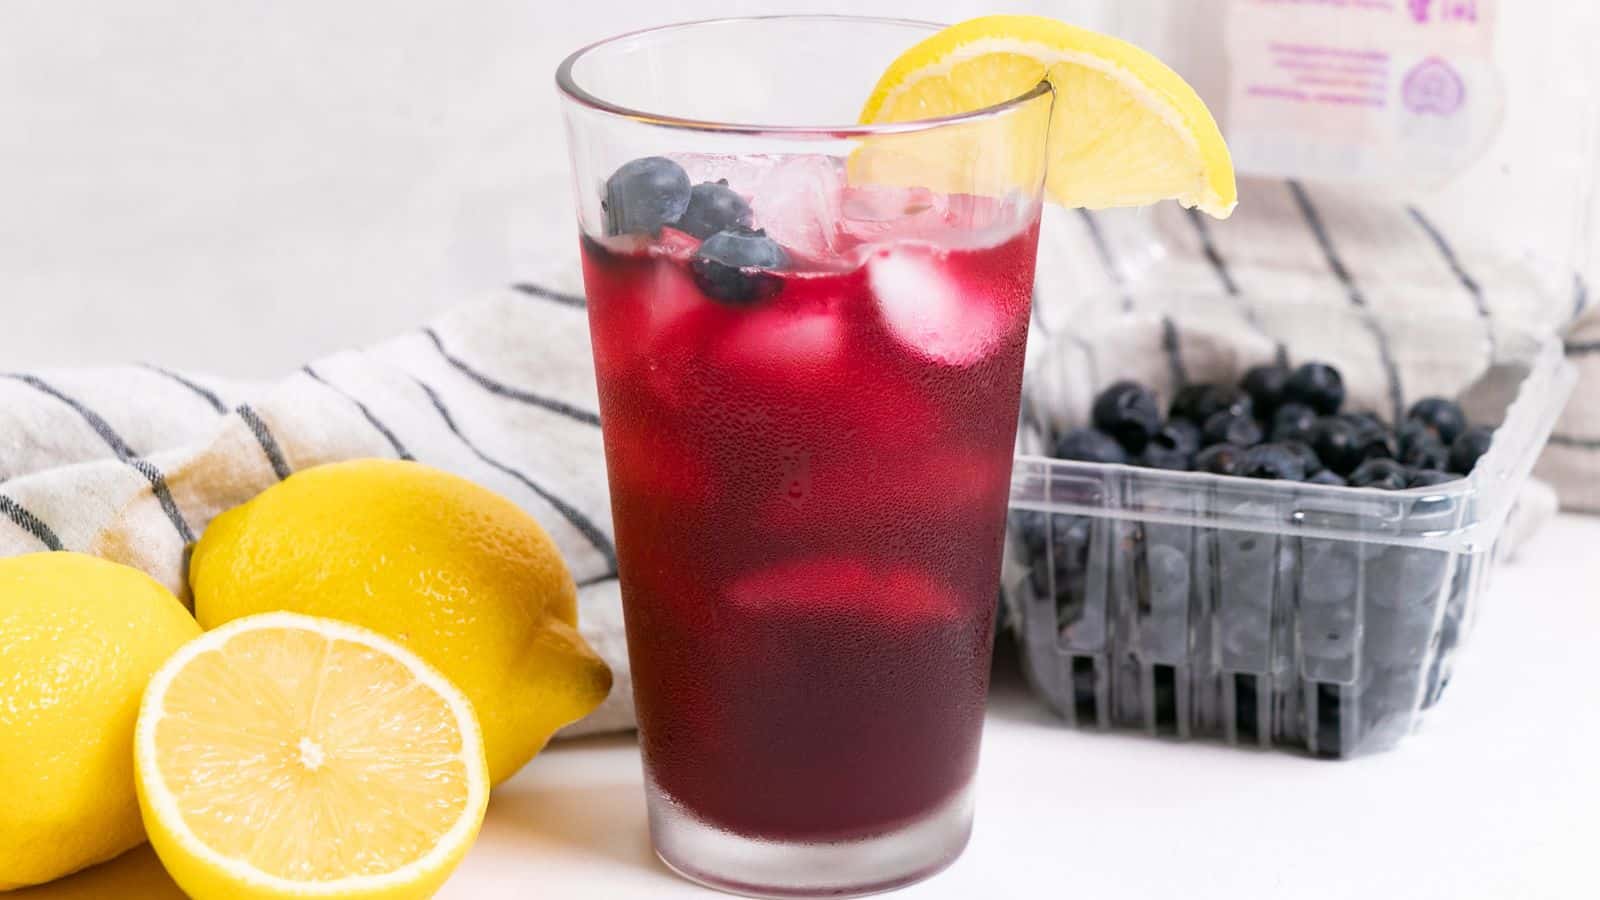 A refreshing glass of blueberry lemonade with ice, garnished with a lemon slice and blueberries, next to whole lemons and a container of blueberries.